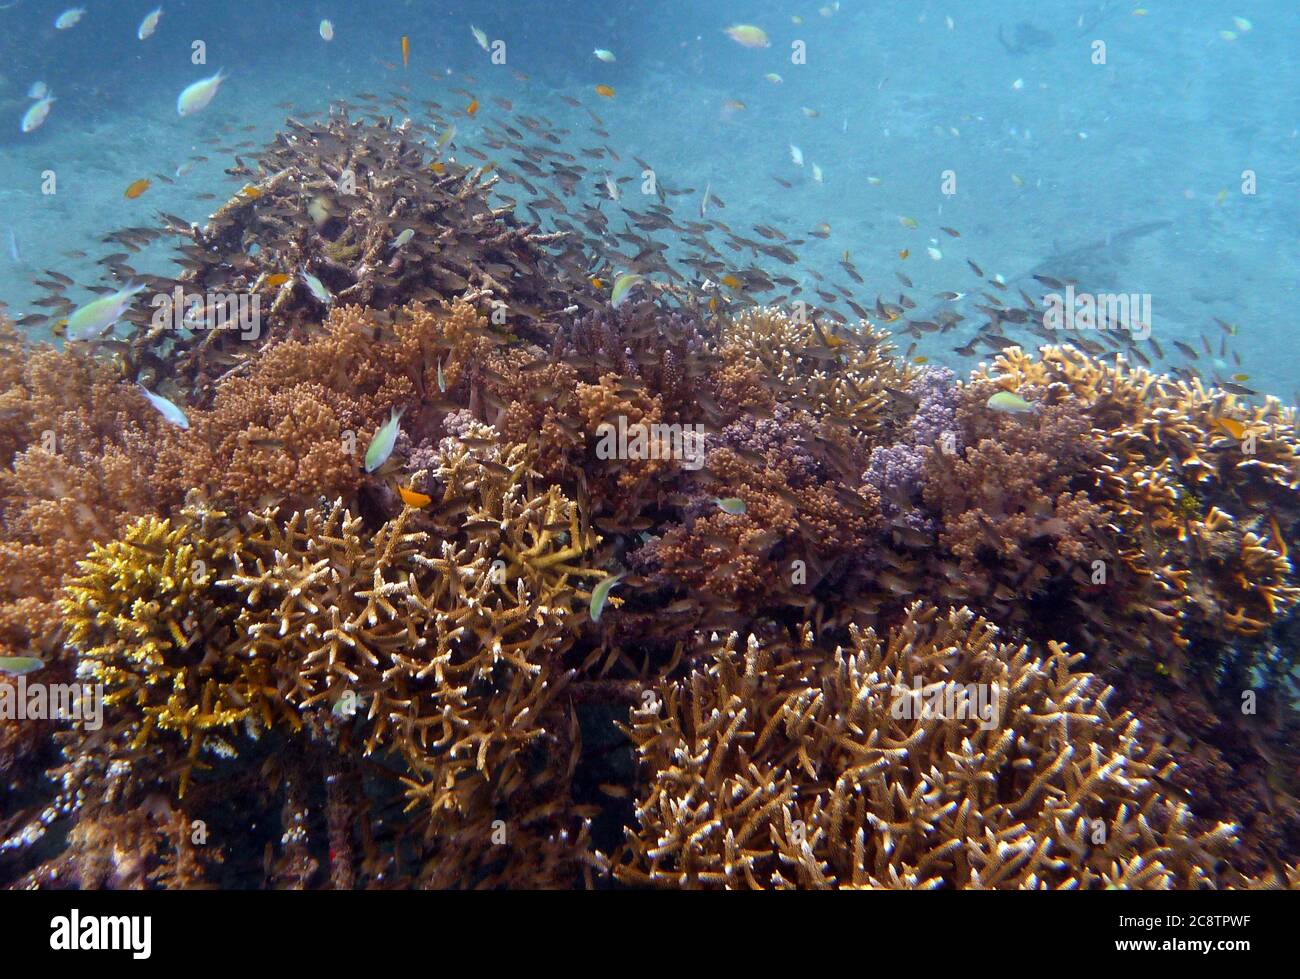 Pemuteran village the largest Biorock coral reef nursery and restoration project in the world. Stock Photo